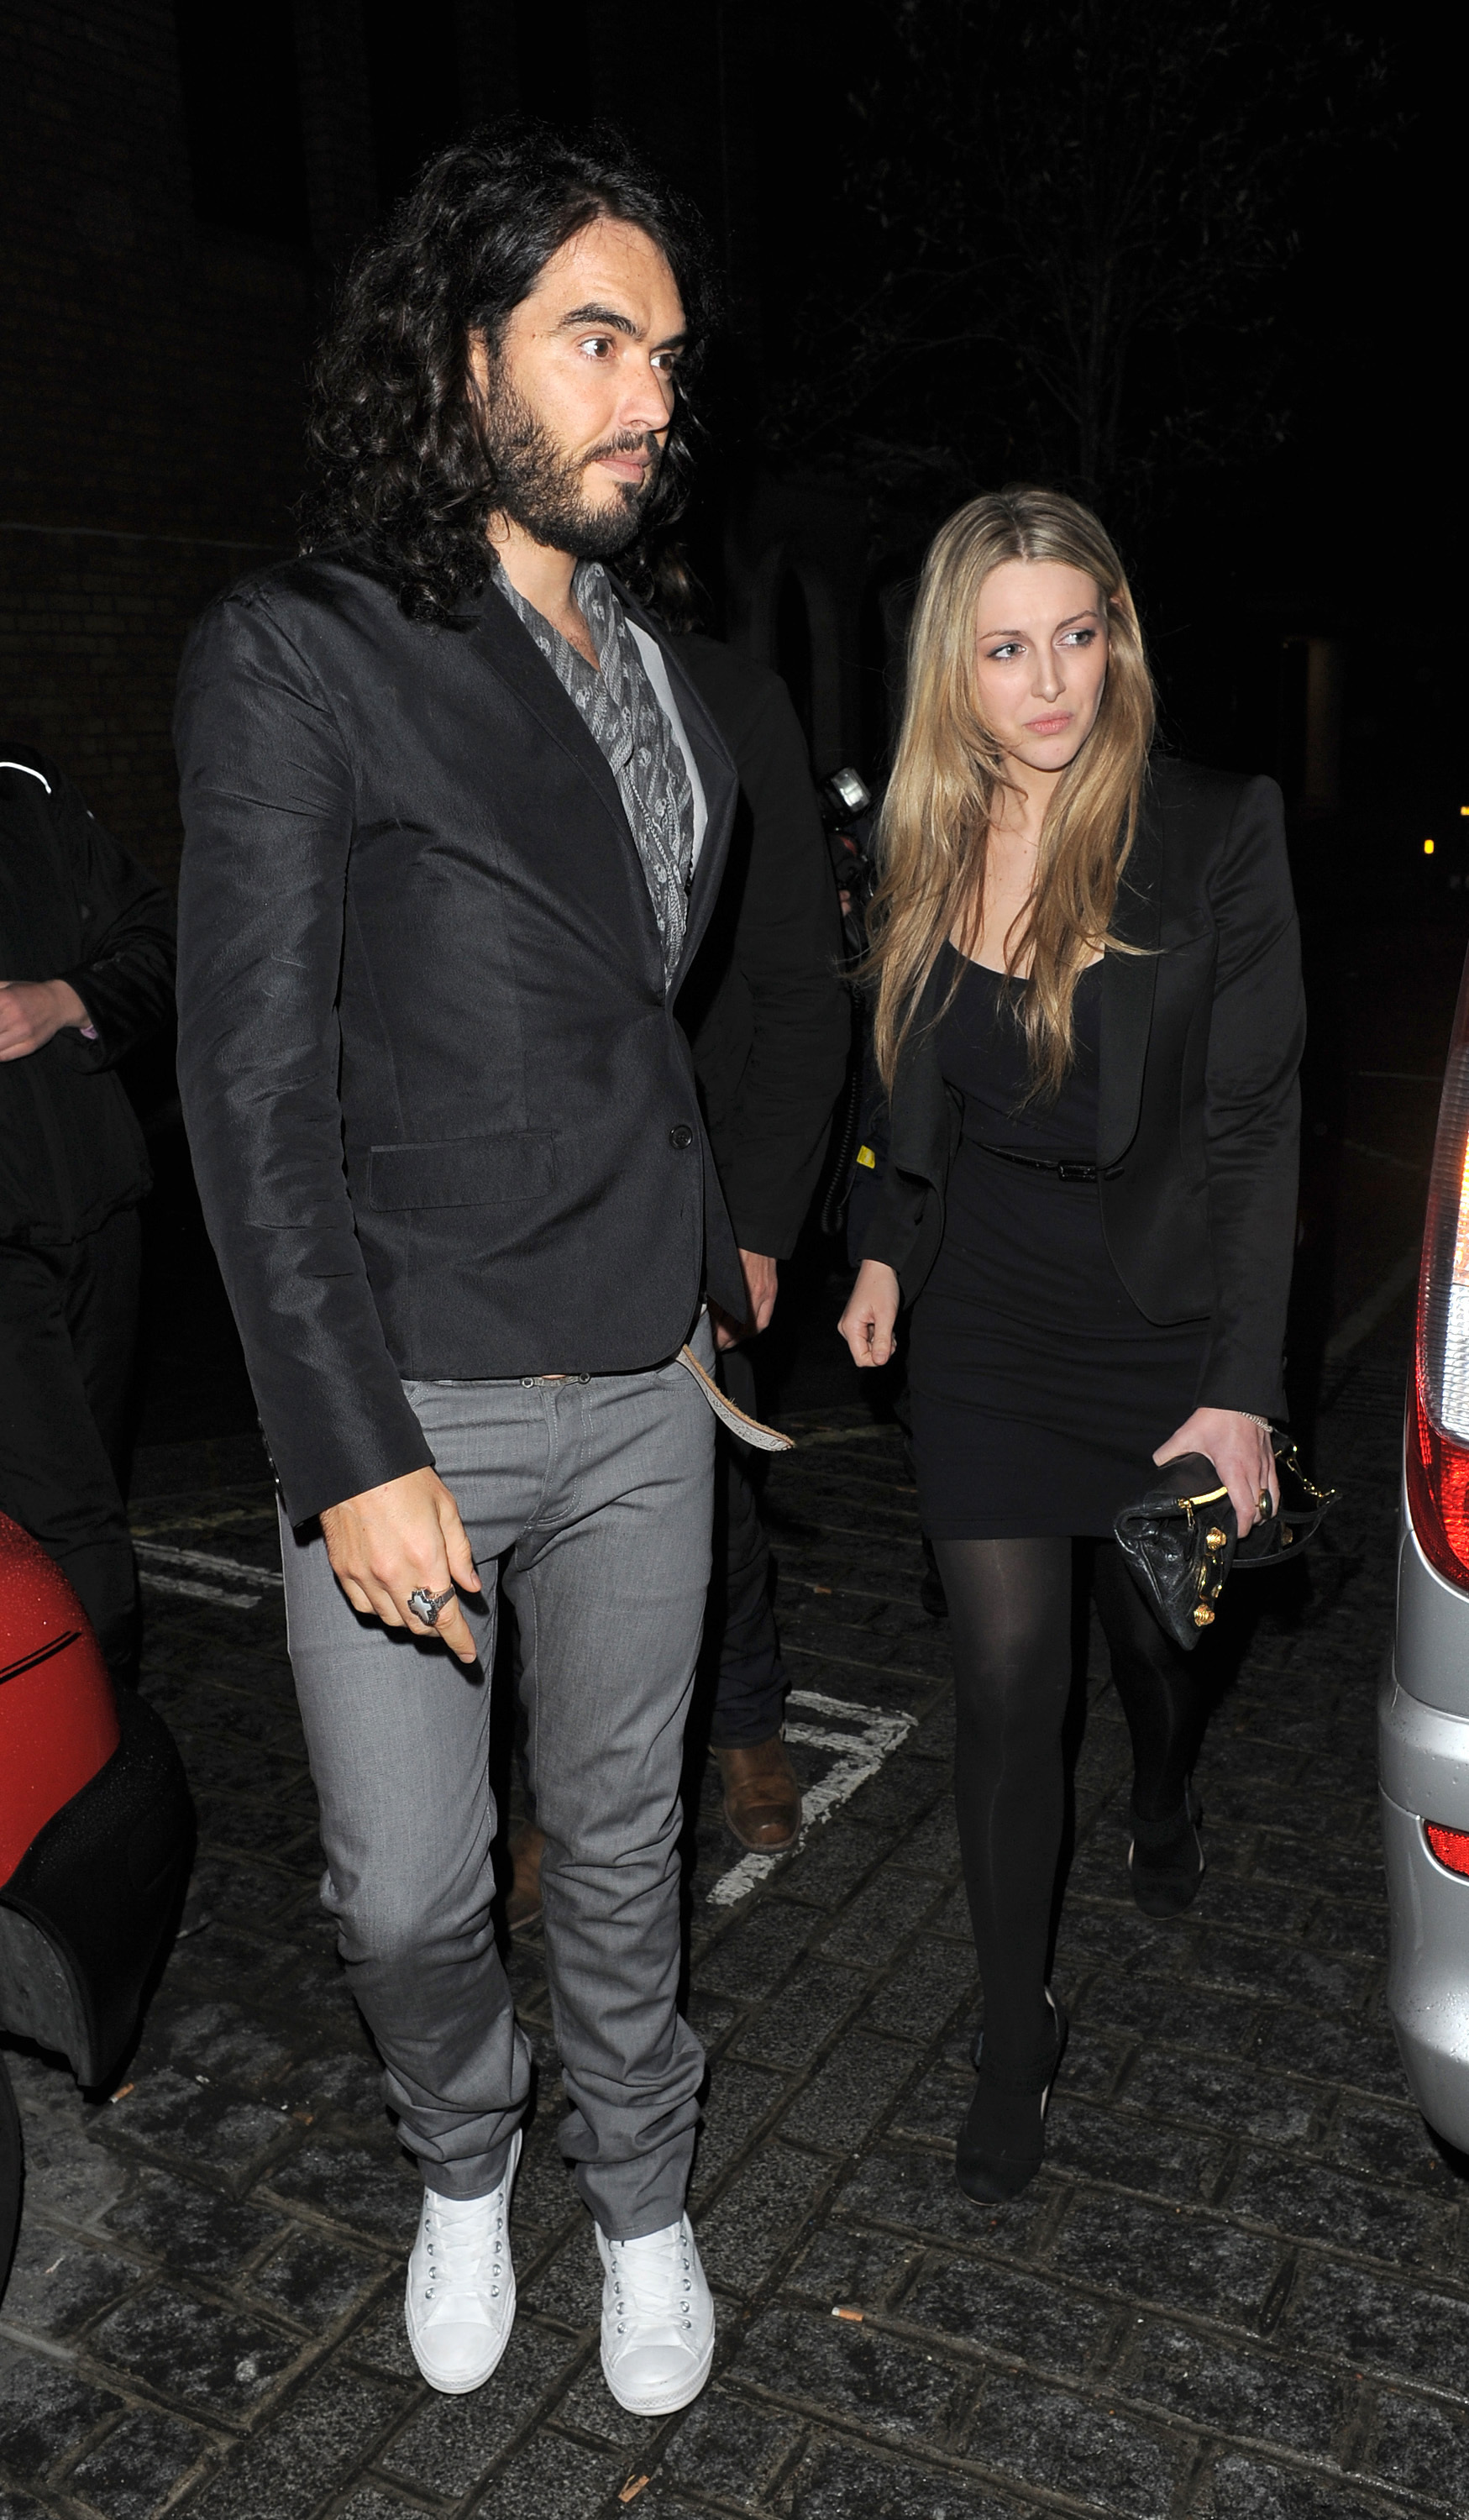 Russell Brand and Laura Gallacher Expecting Baby No. 3